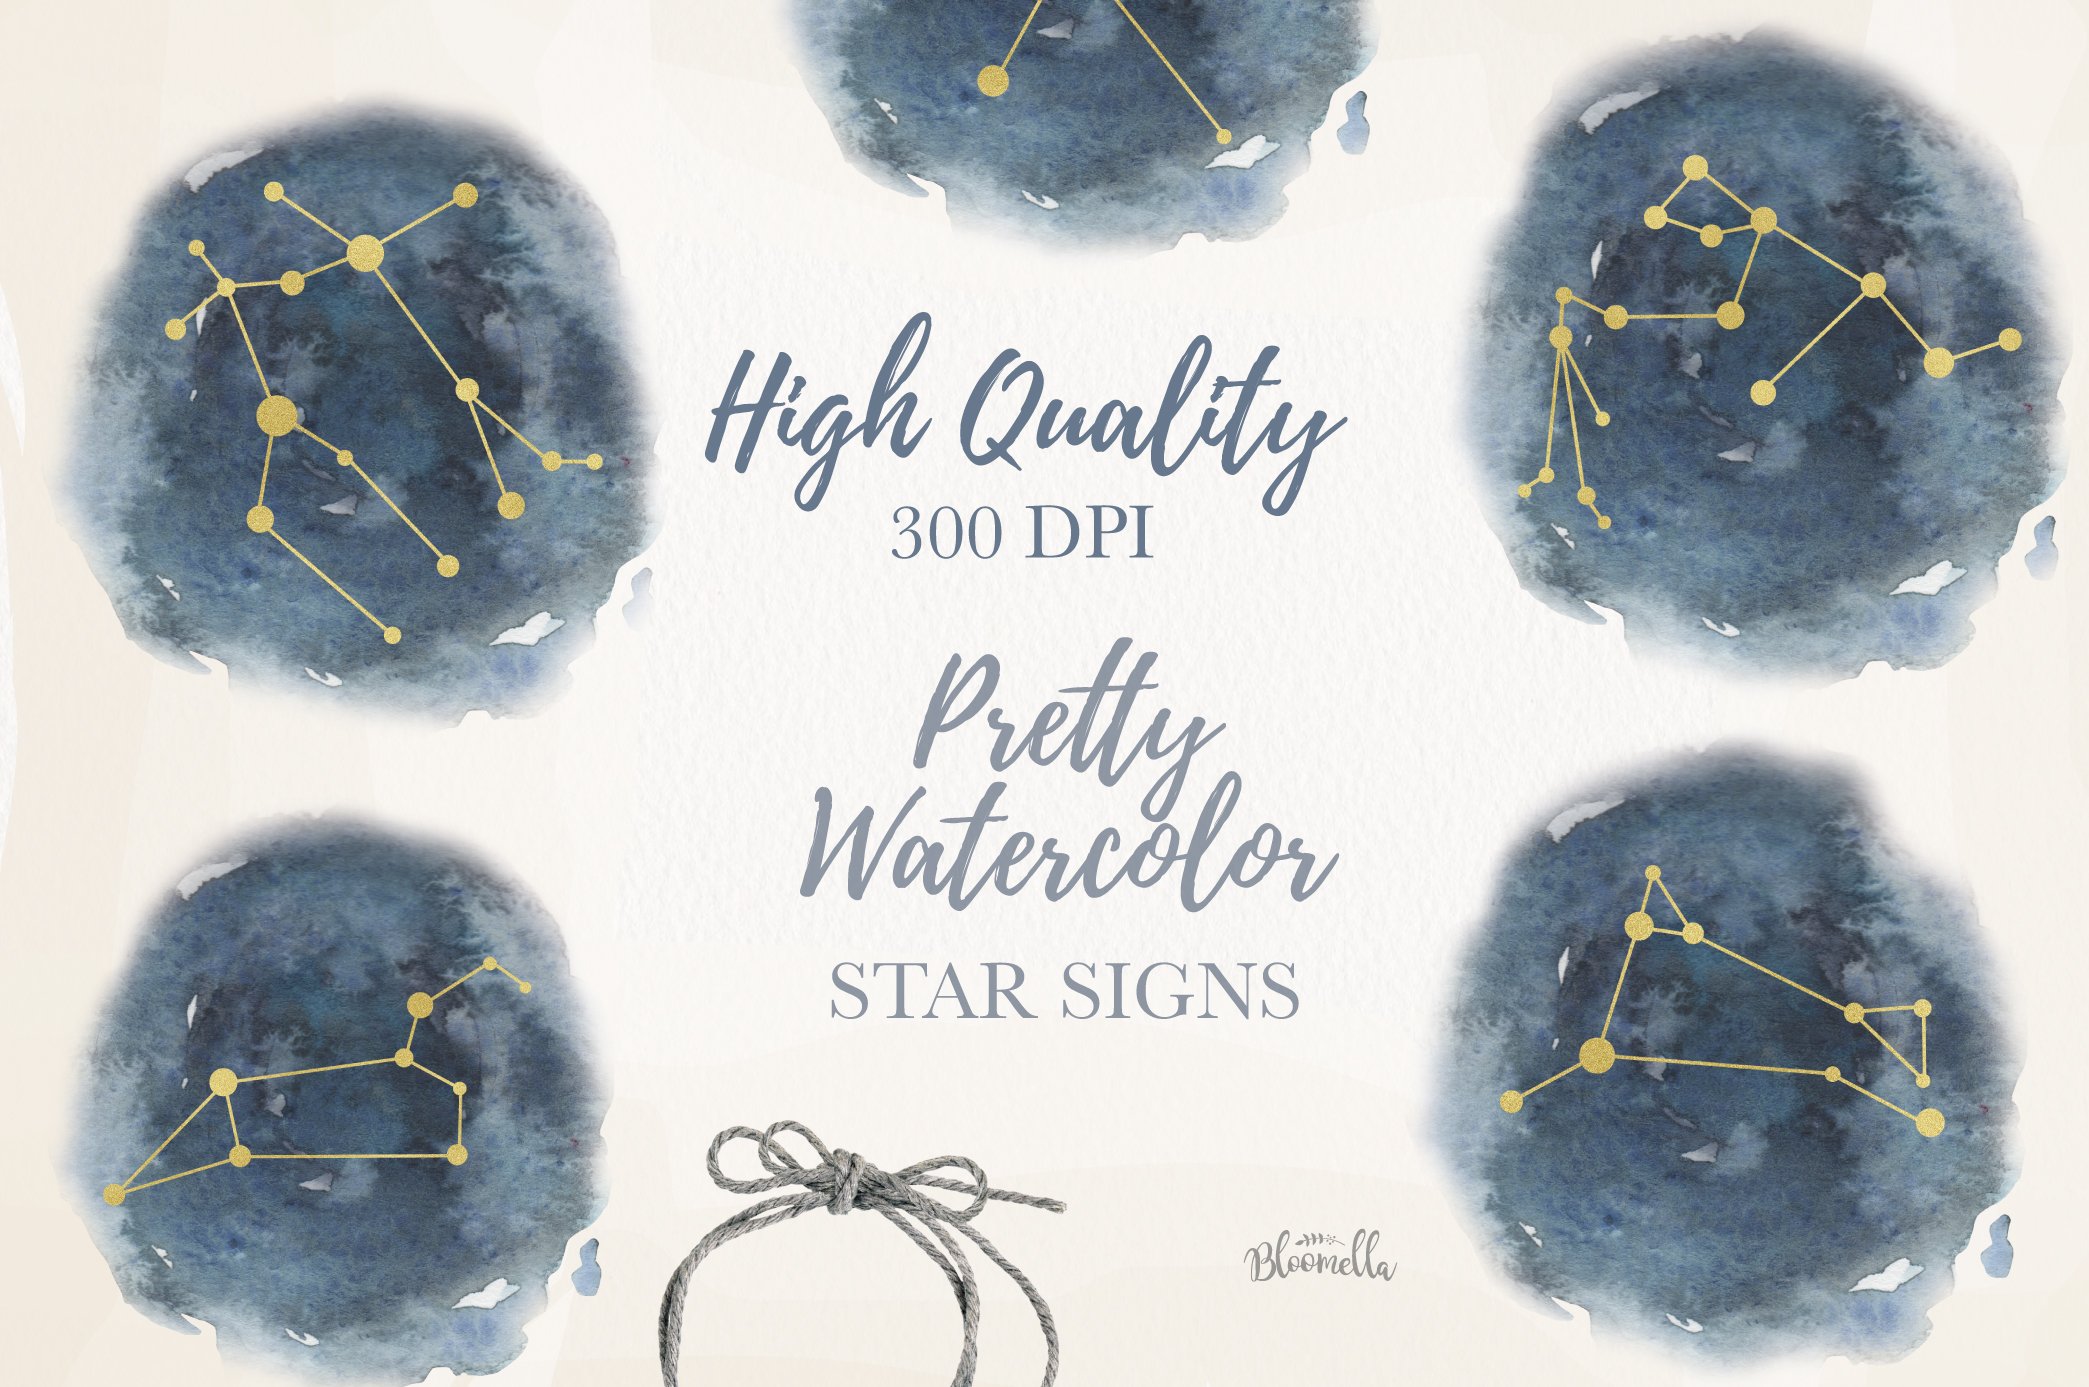 High quality blue watercolor spots with the gold zodiacs.